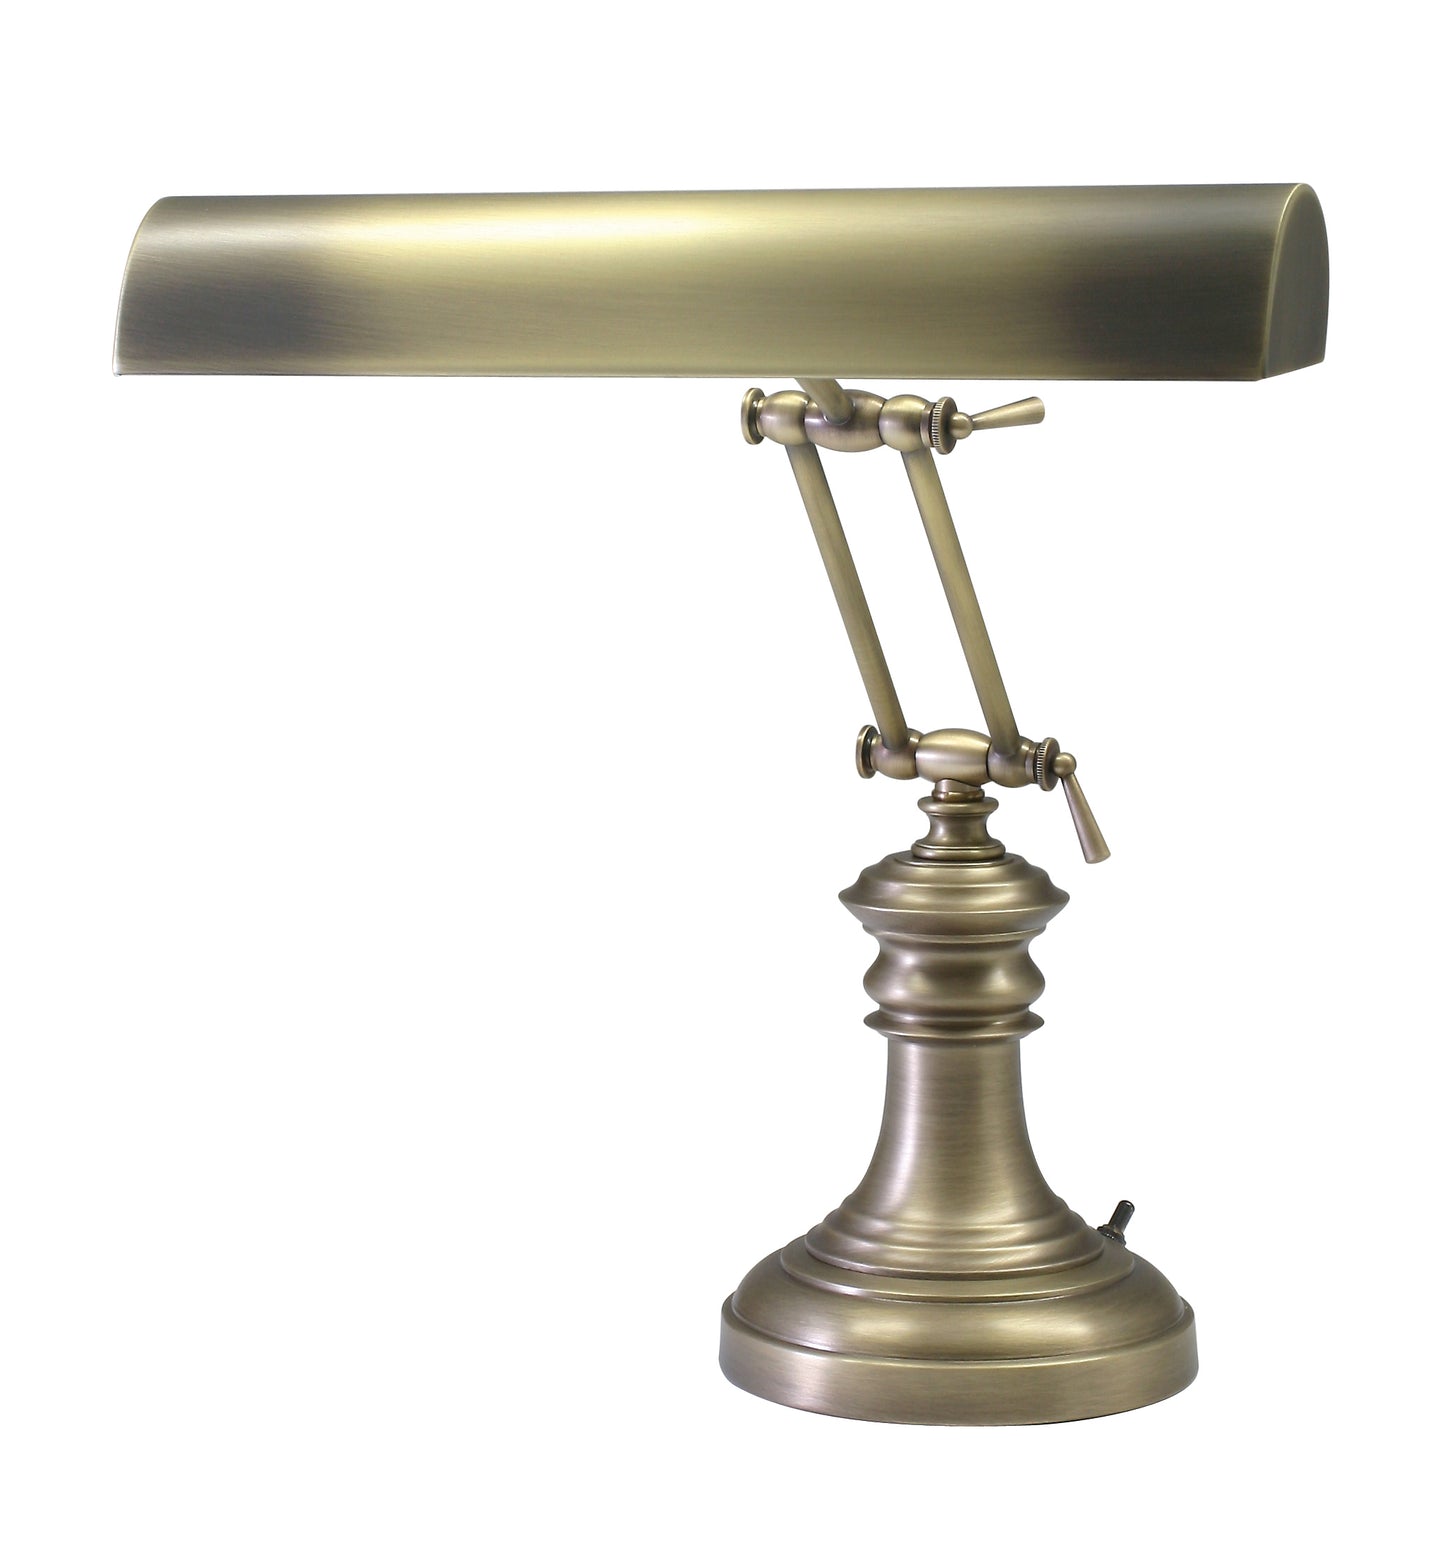 House of Troy Desk/Piano Lamp 14" Antique Brass P14-204-AB